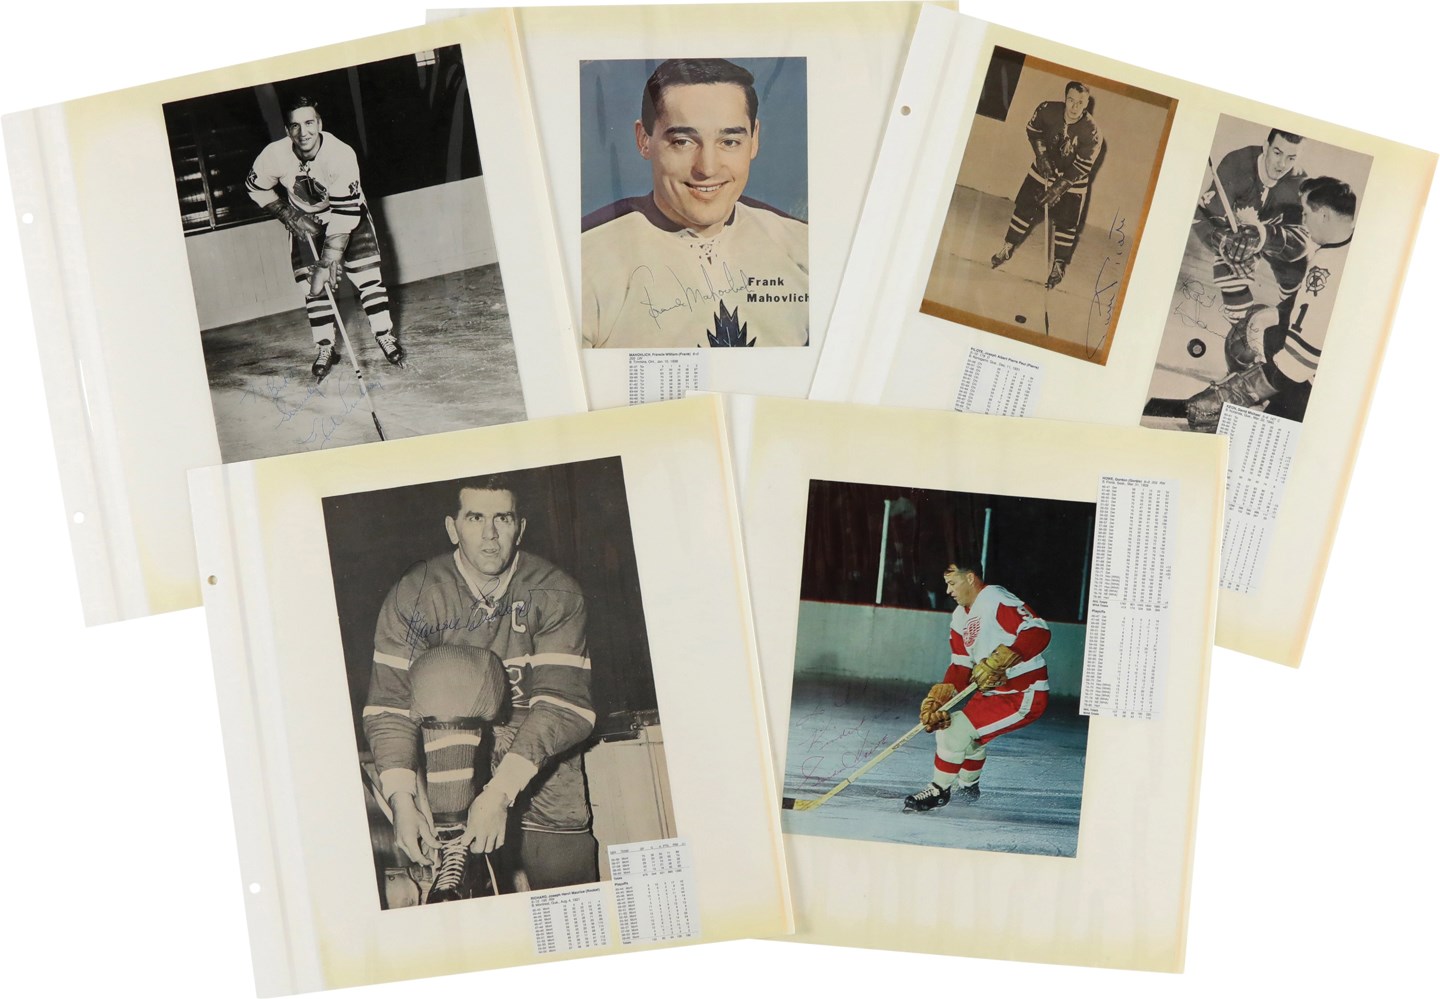 Signed Hockey Photo and Magazine Images with Cuts (37)